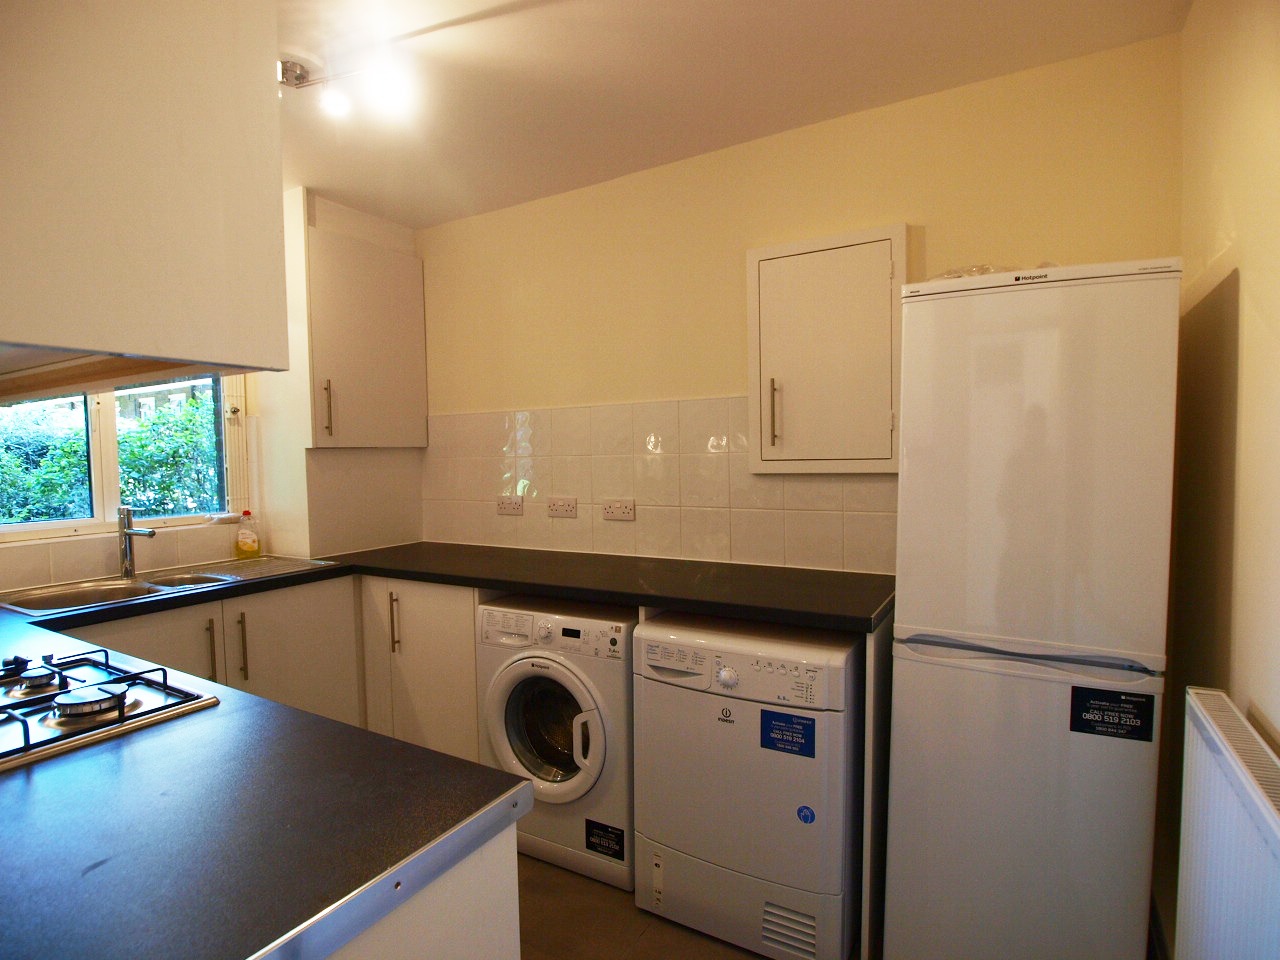 3 Bedroom Flat to rent in Archway, London, N19